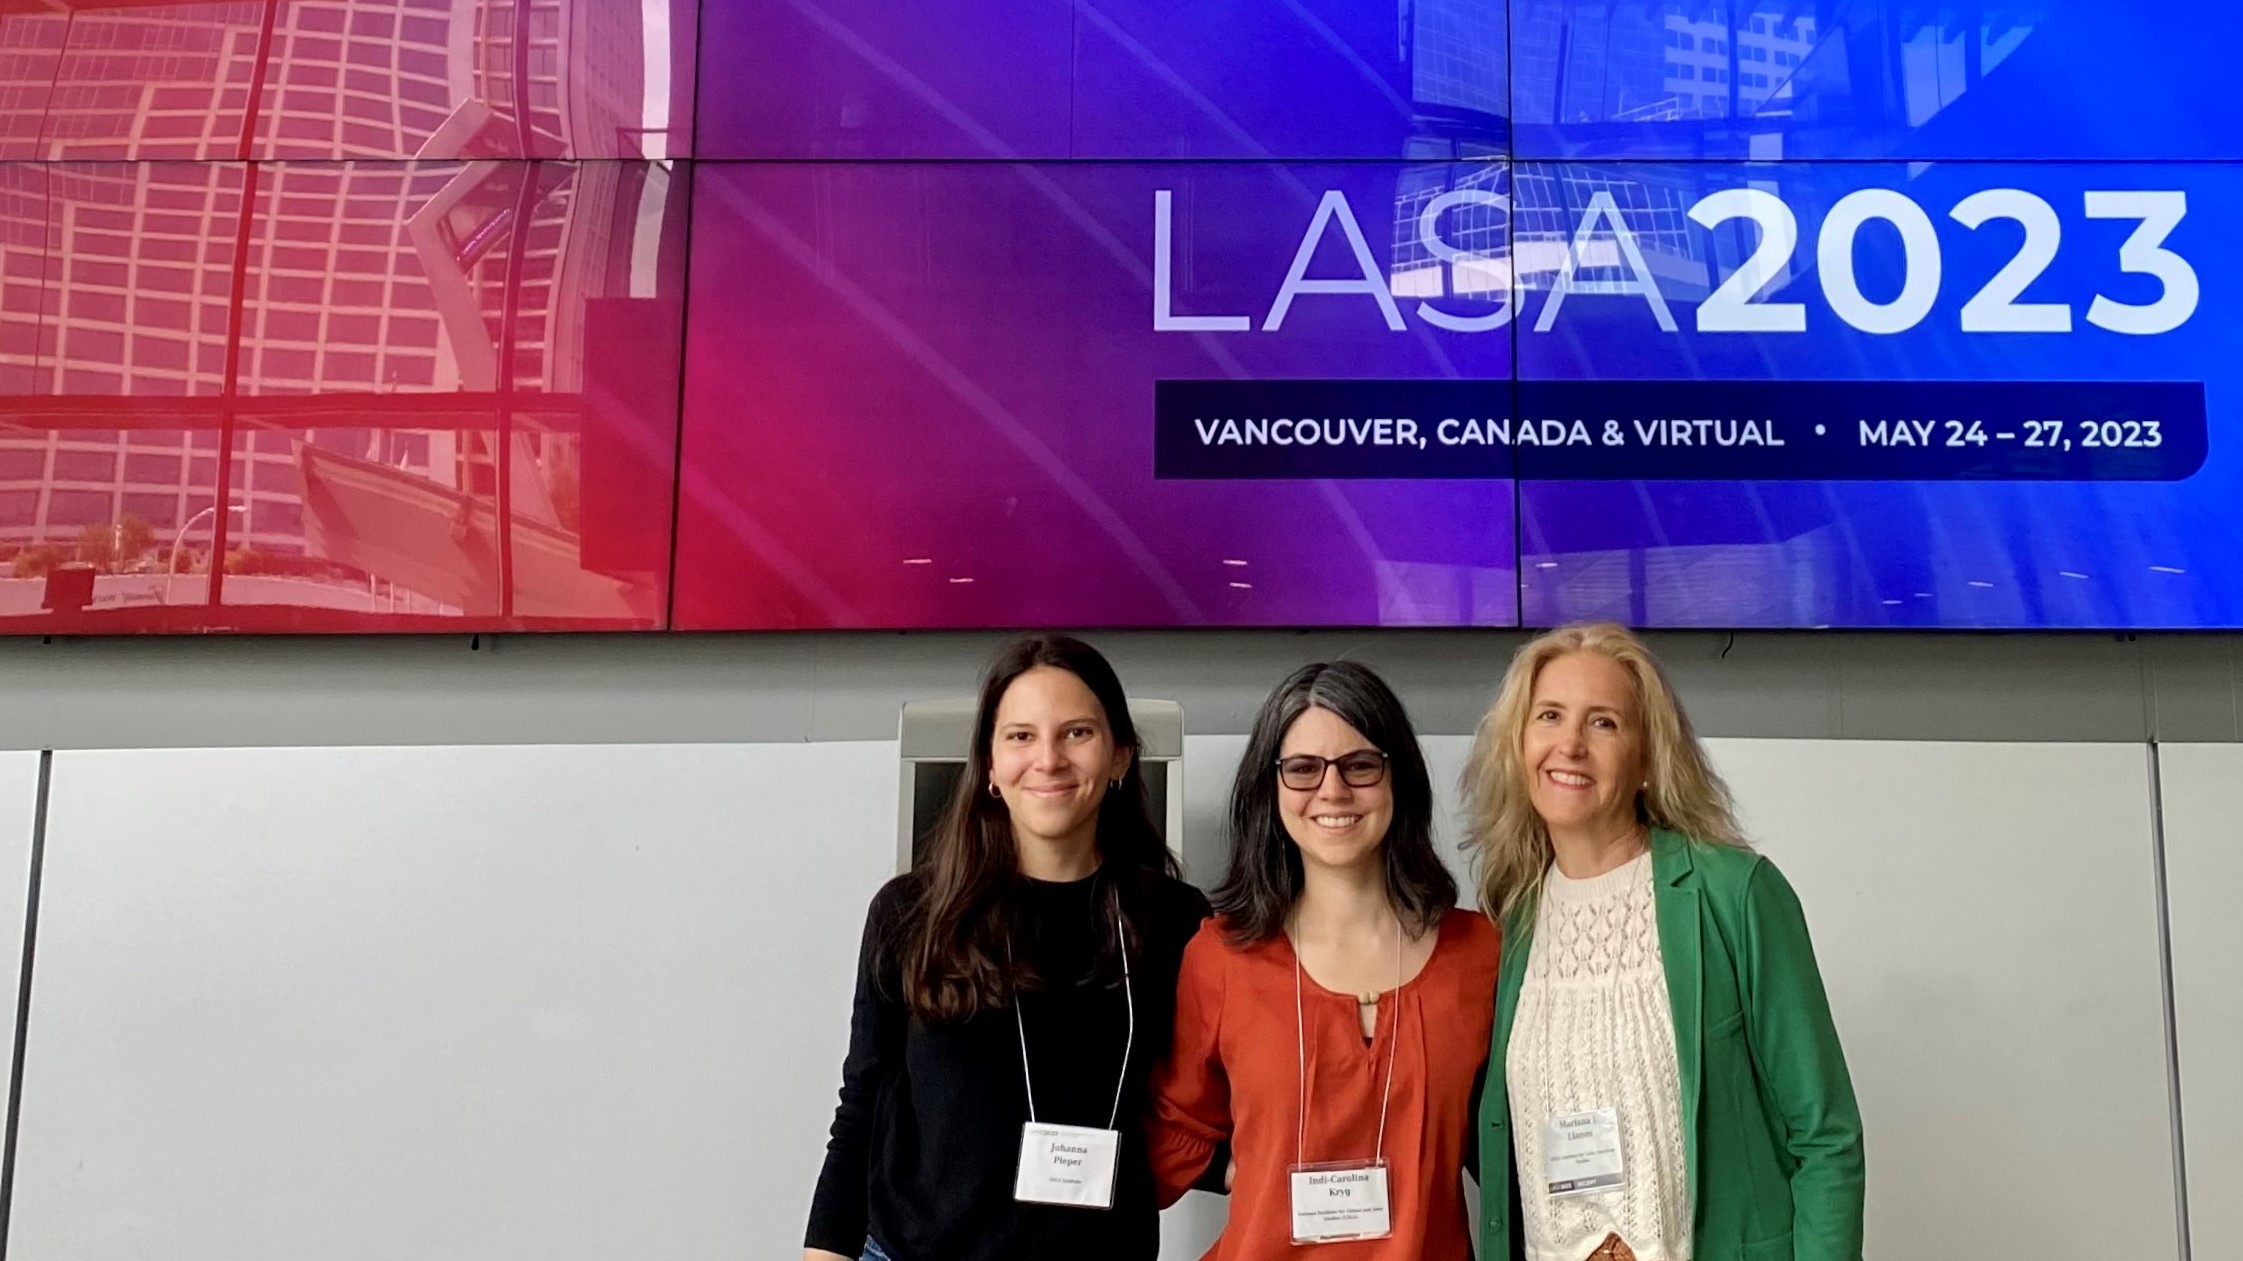 Latin America Researchers Sharing Research Findings at LASA 2023 